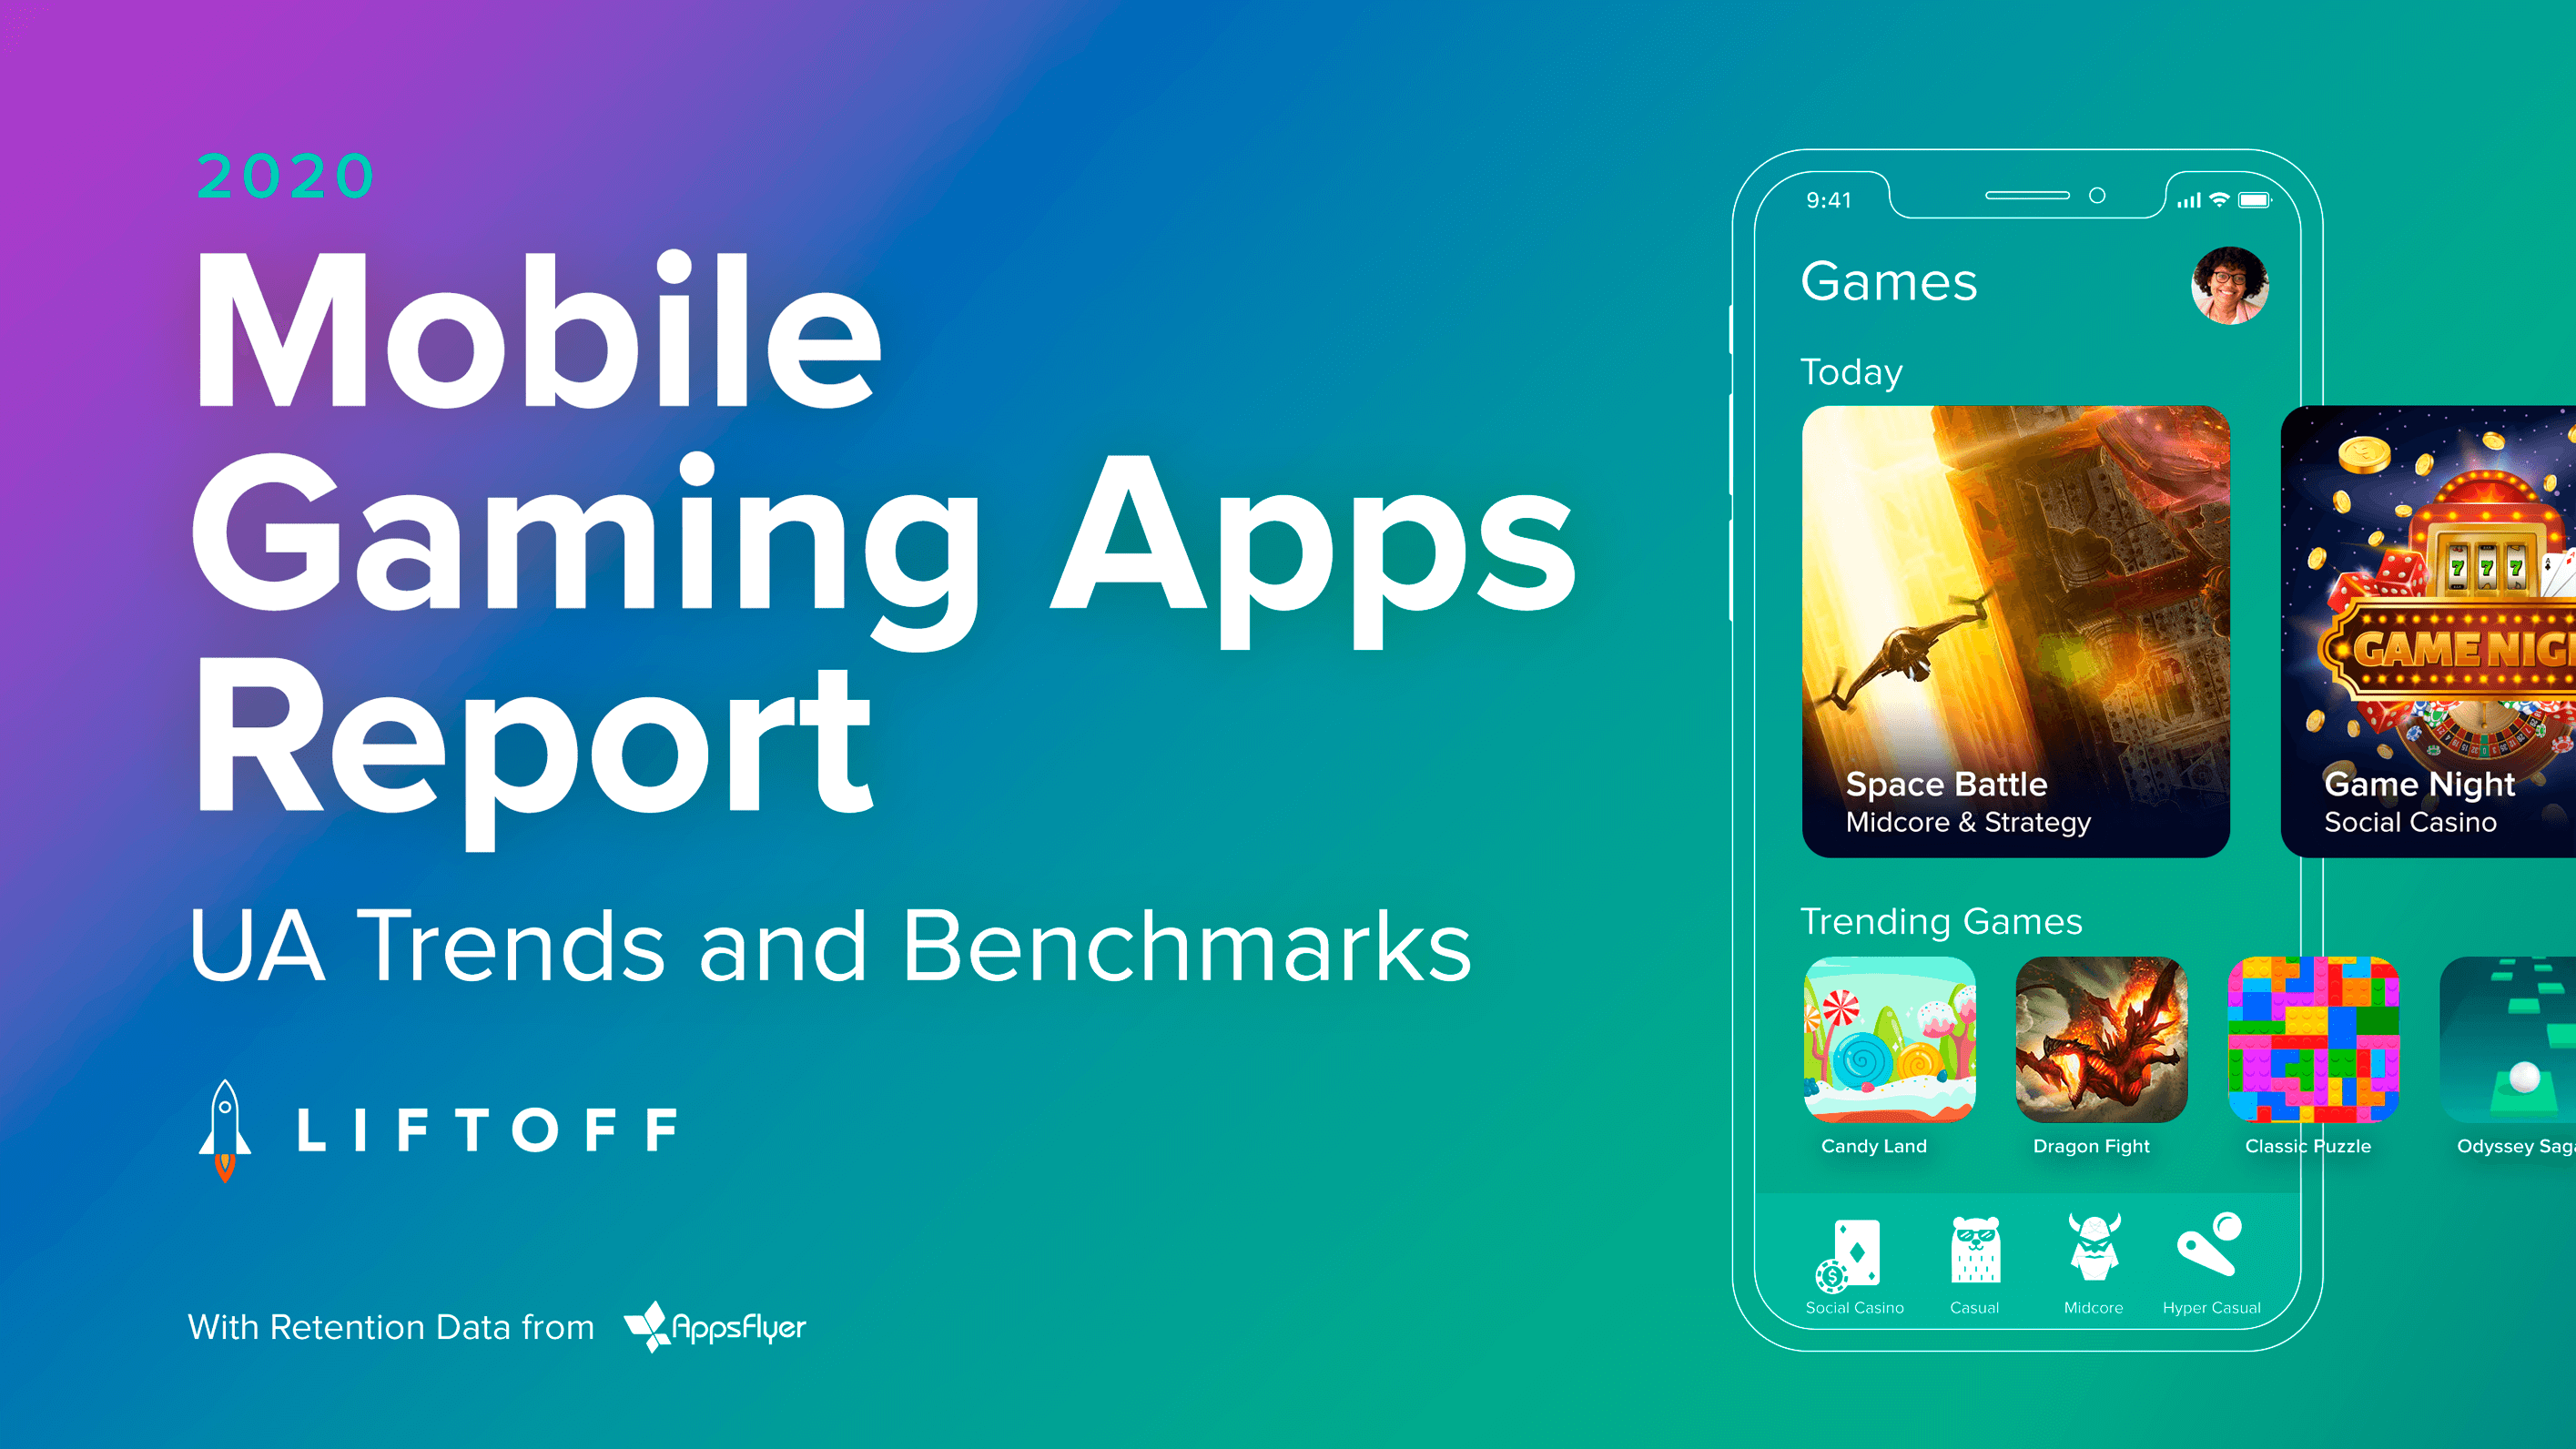 NEW! 2020 Mobile Gaming Apps Report